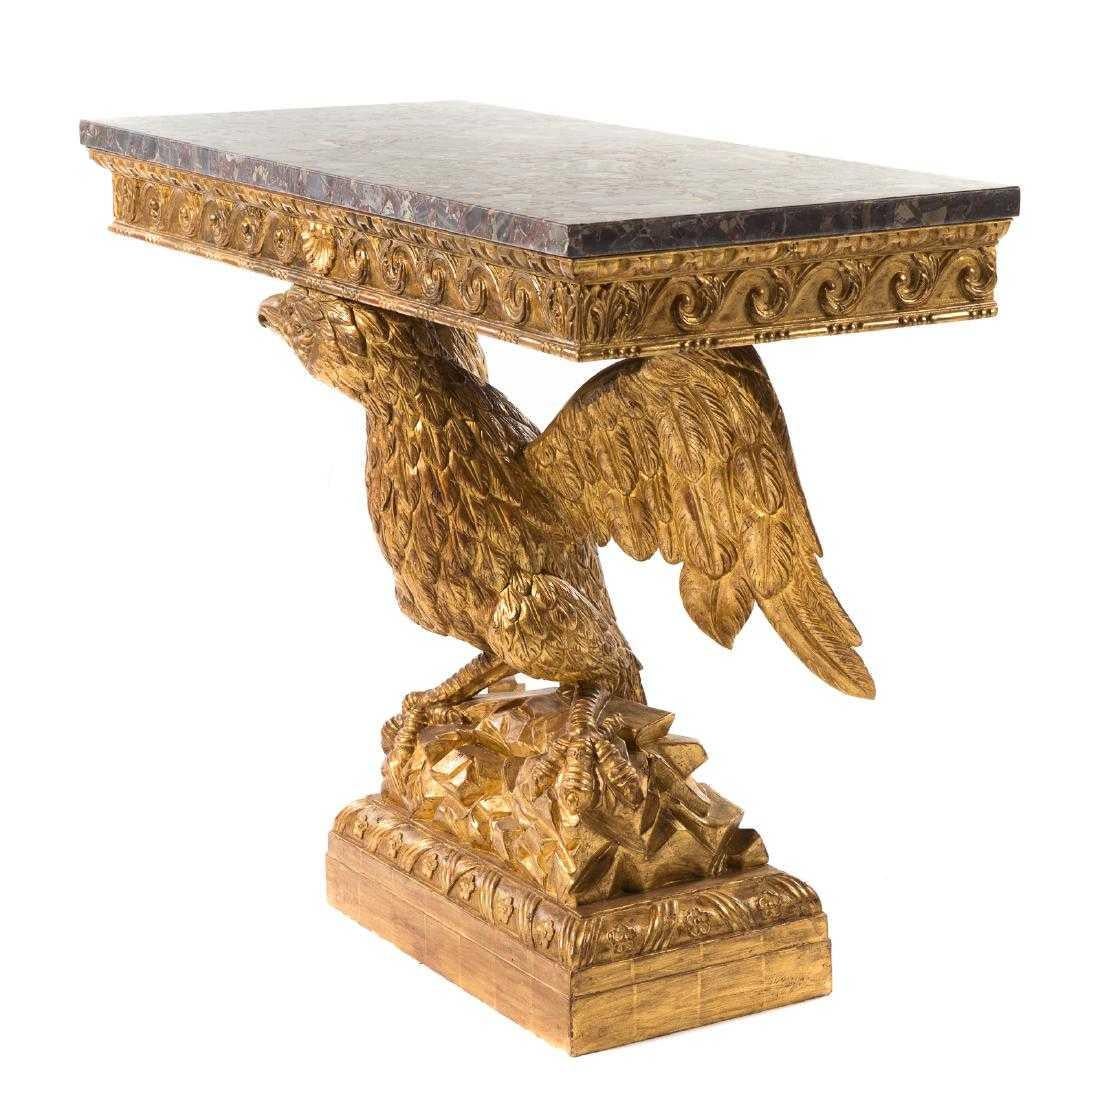 George II style carved giltwood eagle console n the manner of William Kent, 20th century; rectangular grey breccia marble top, scroll carved apron, carved winged eagle standards on rusticated base, carved plinth base.